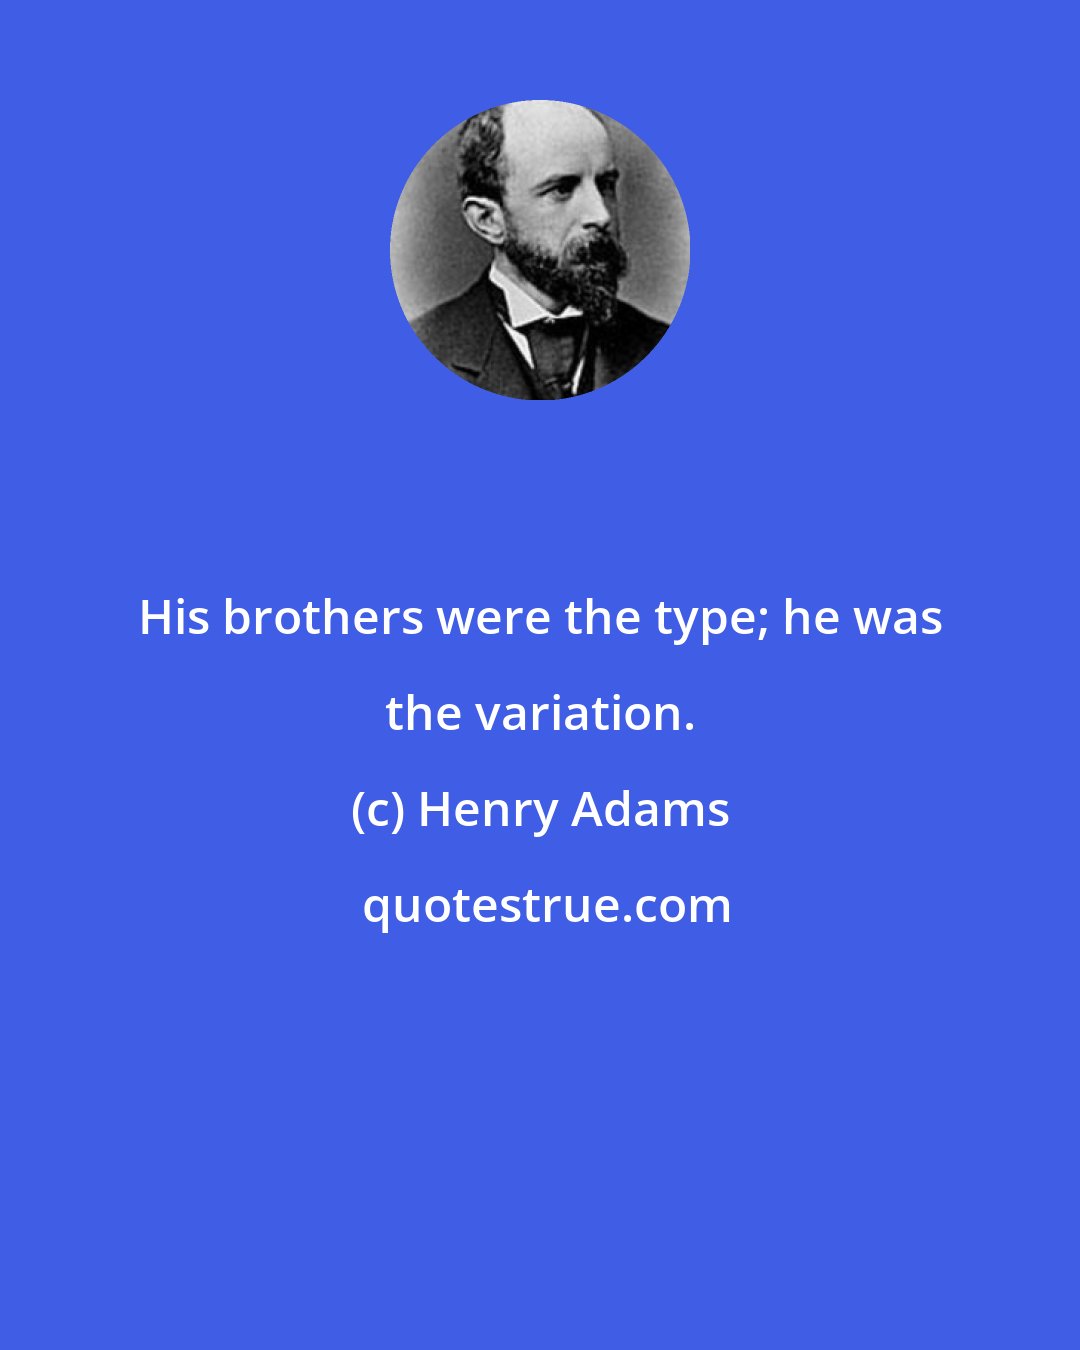 Henry Adams: His brothers were the type; he was the variation.